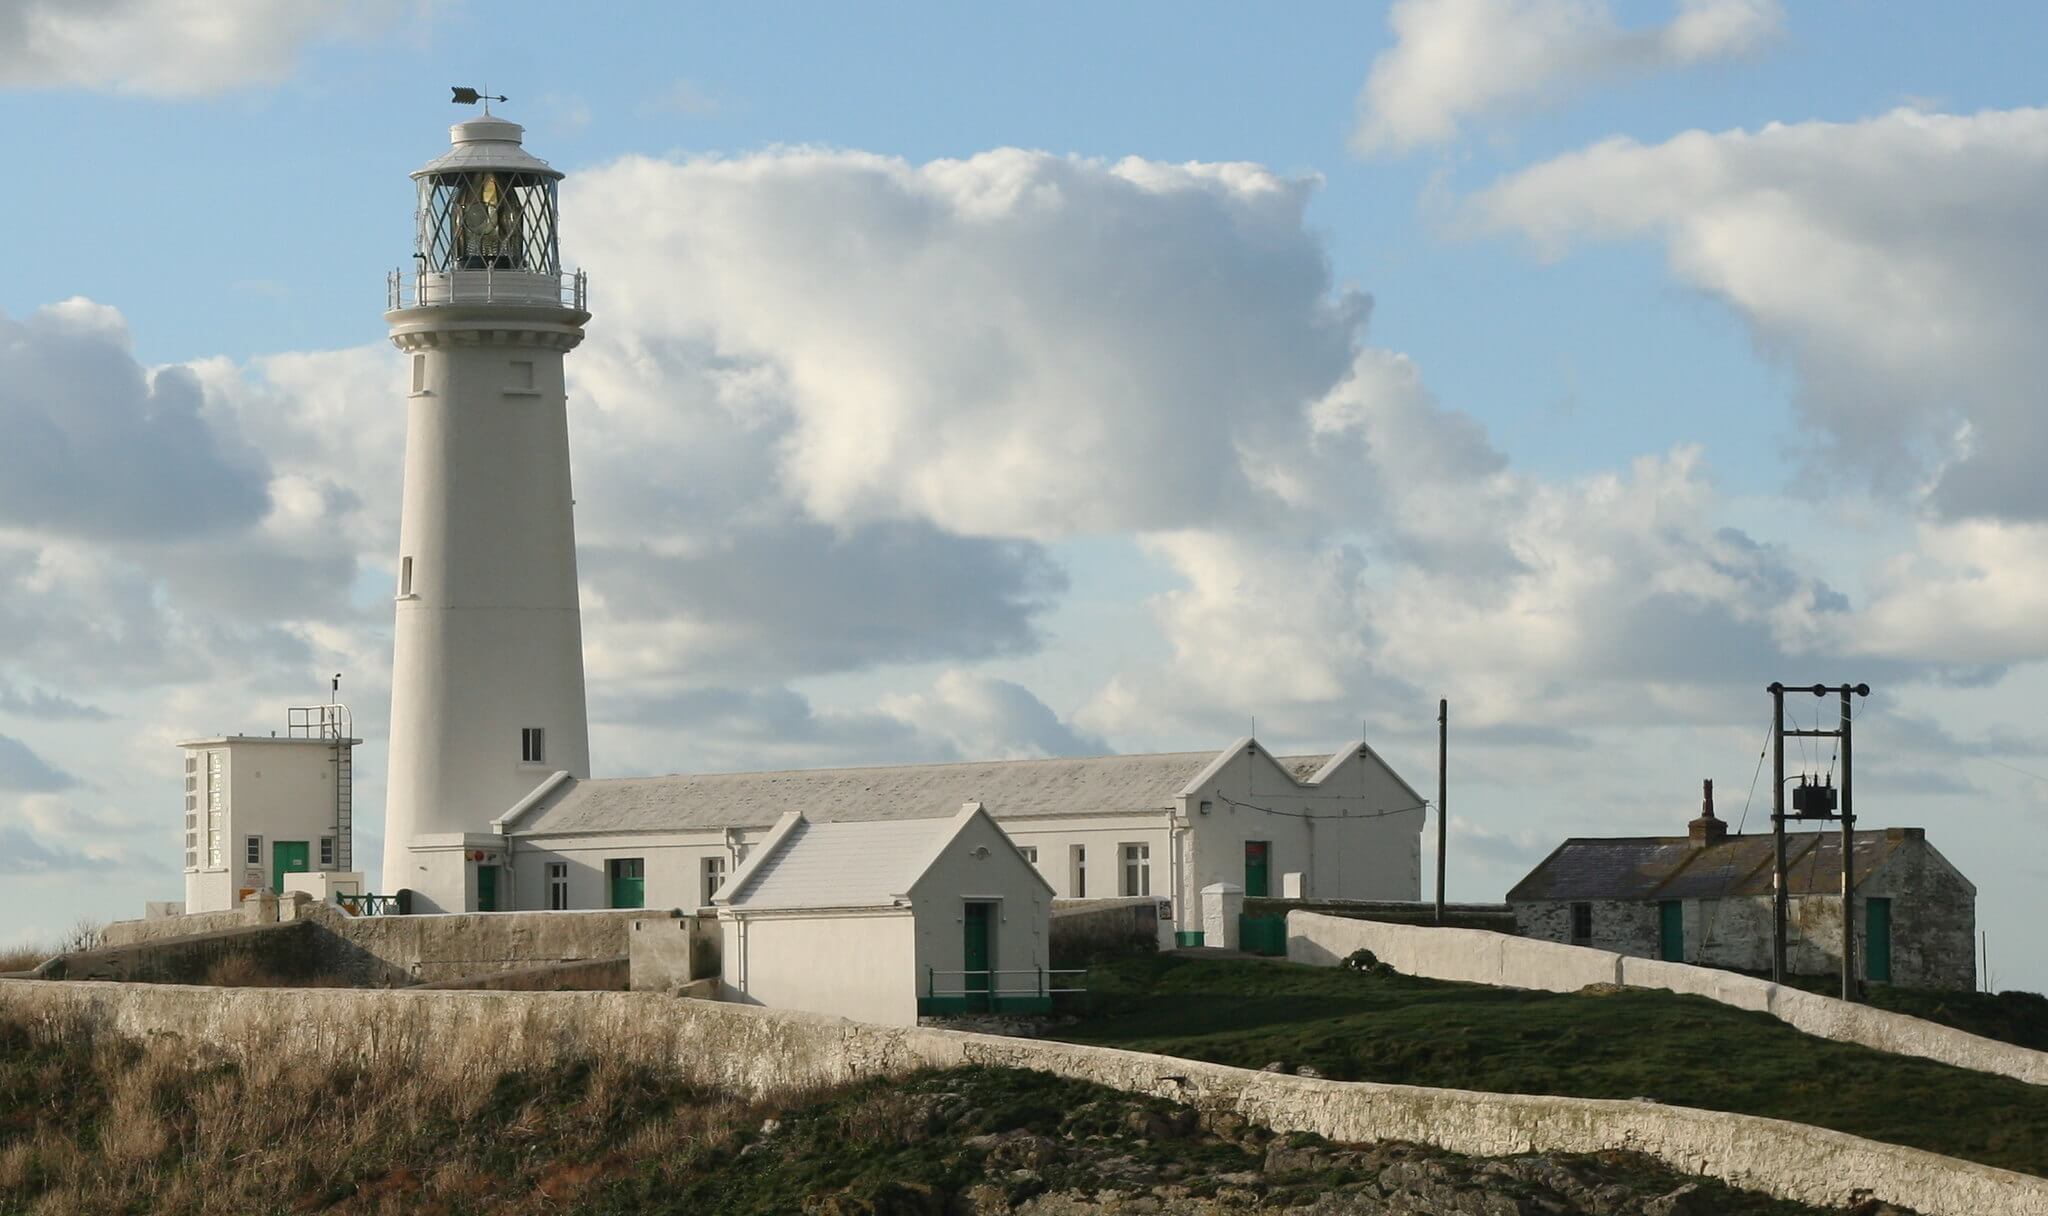 the Anglesey lighthouse is one of the best points of interest in Anglesey